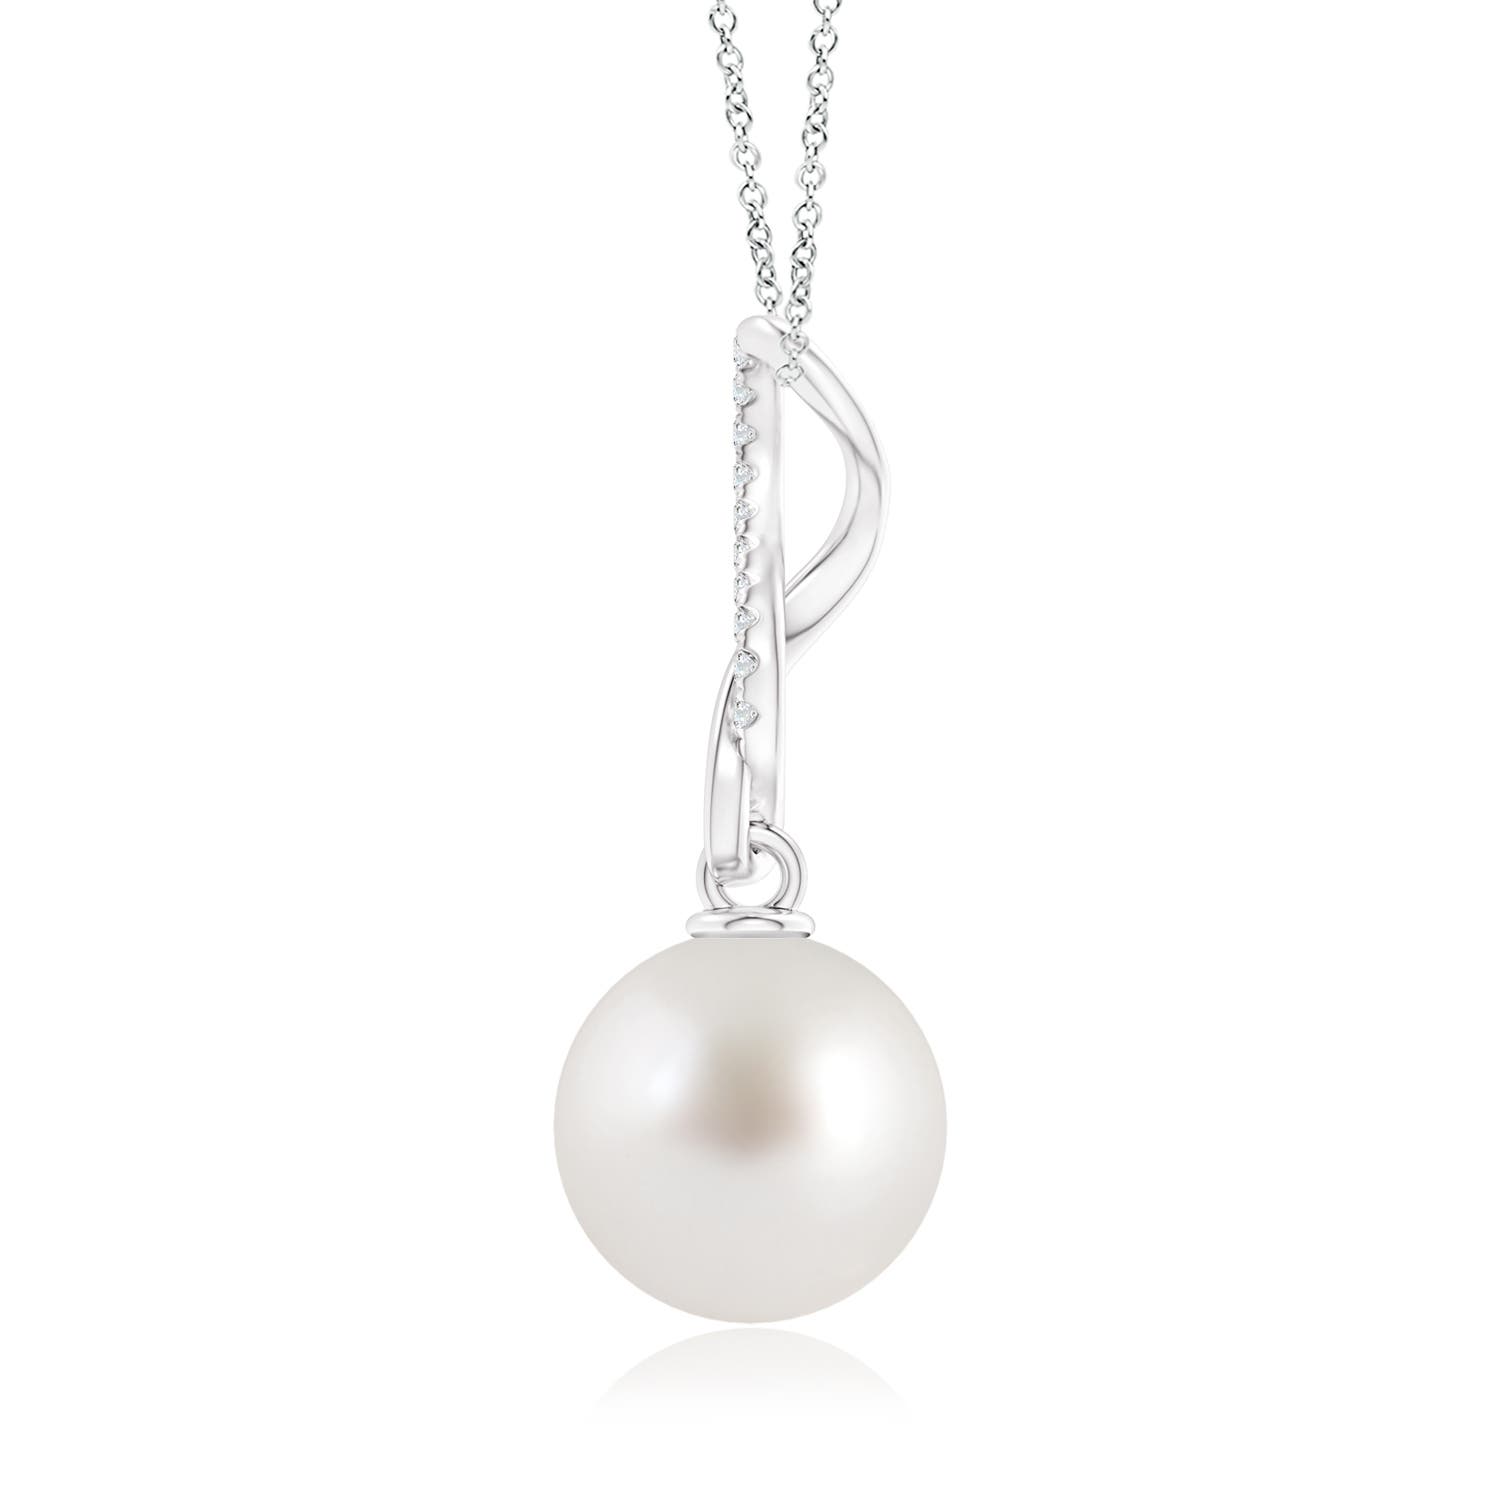 AAA - South Sea Cultured Pearl / 7.26 CT / 14 KT White Gold